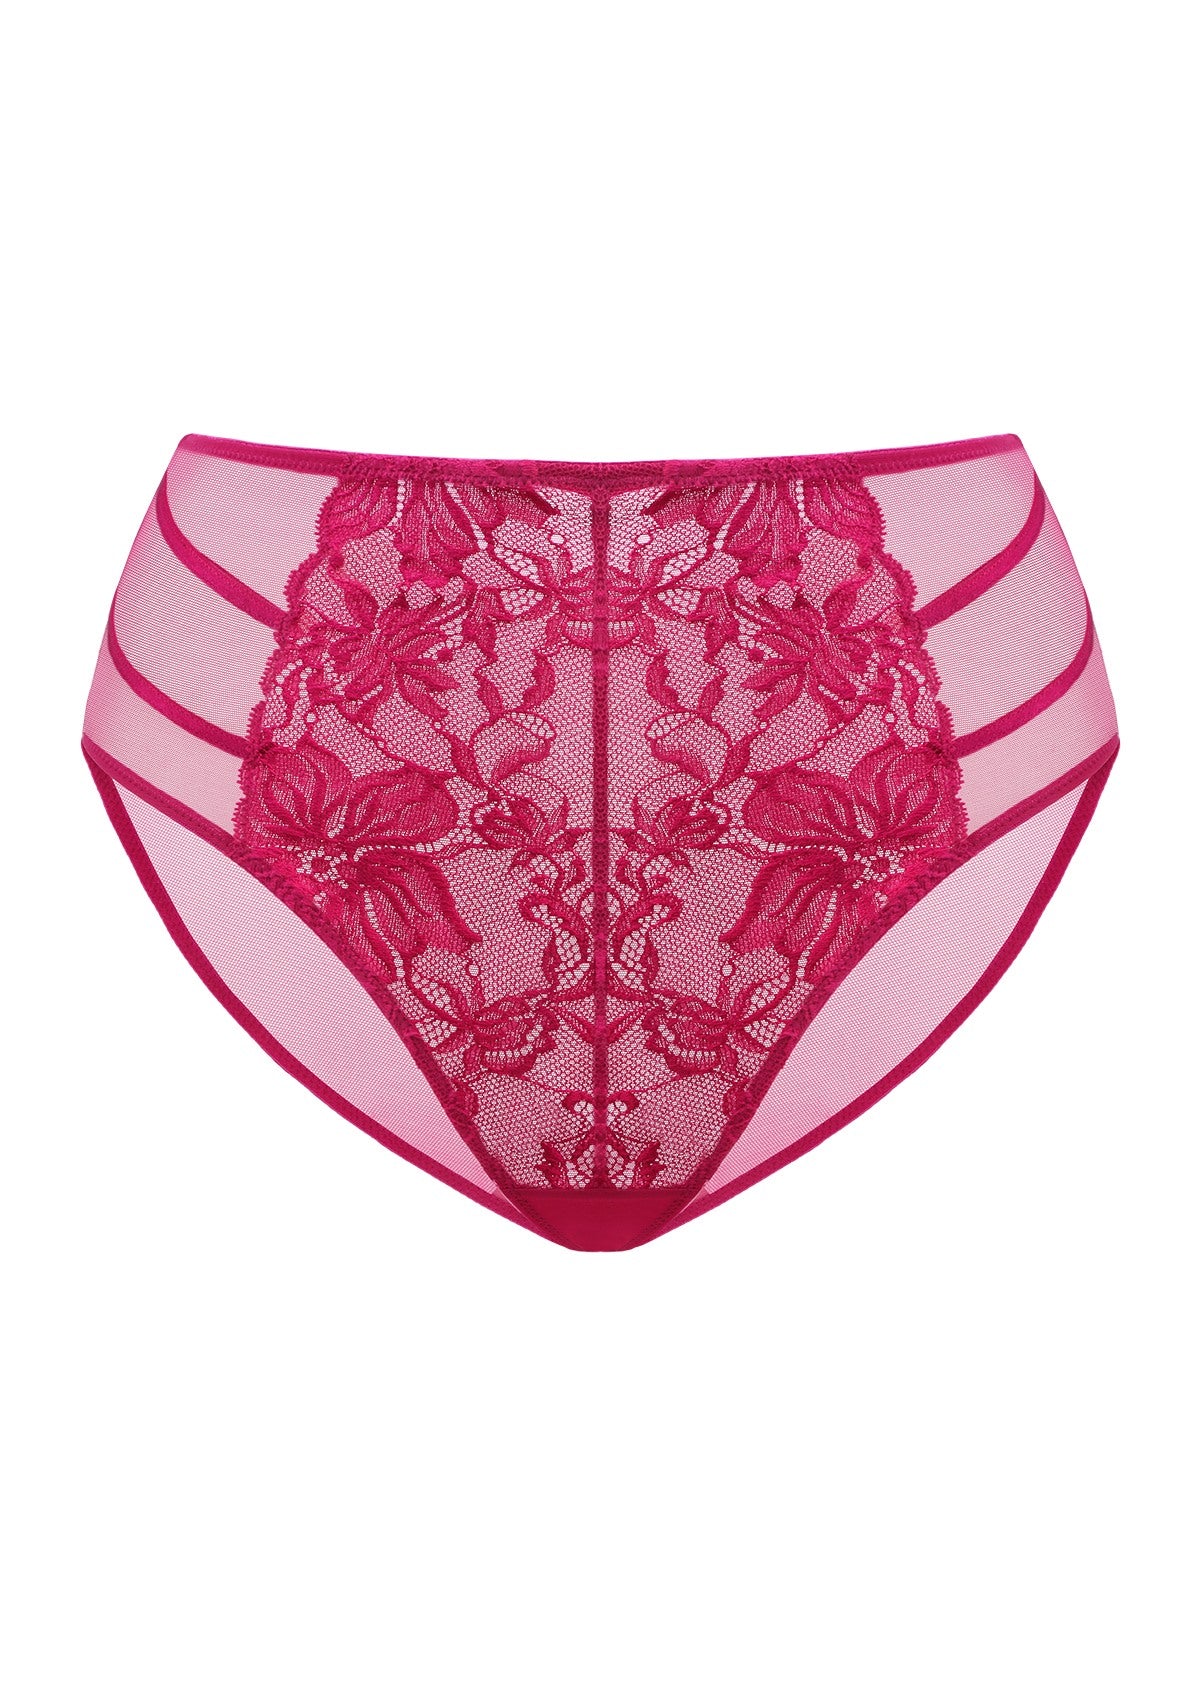 HSIA Pretty In Petals Mid-Rise Sexy Lace Everyday Underwear  - XL / High-Rise Brief / Red